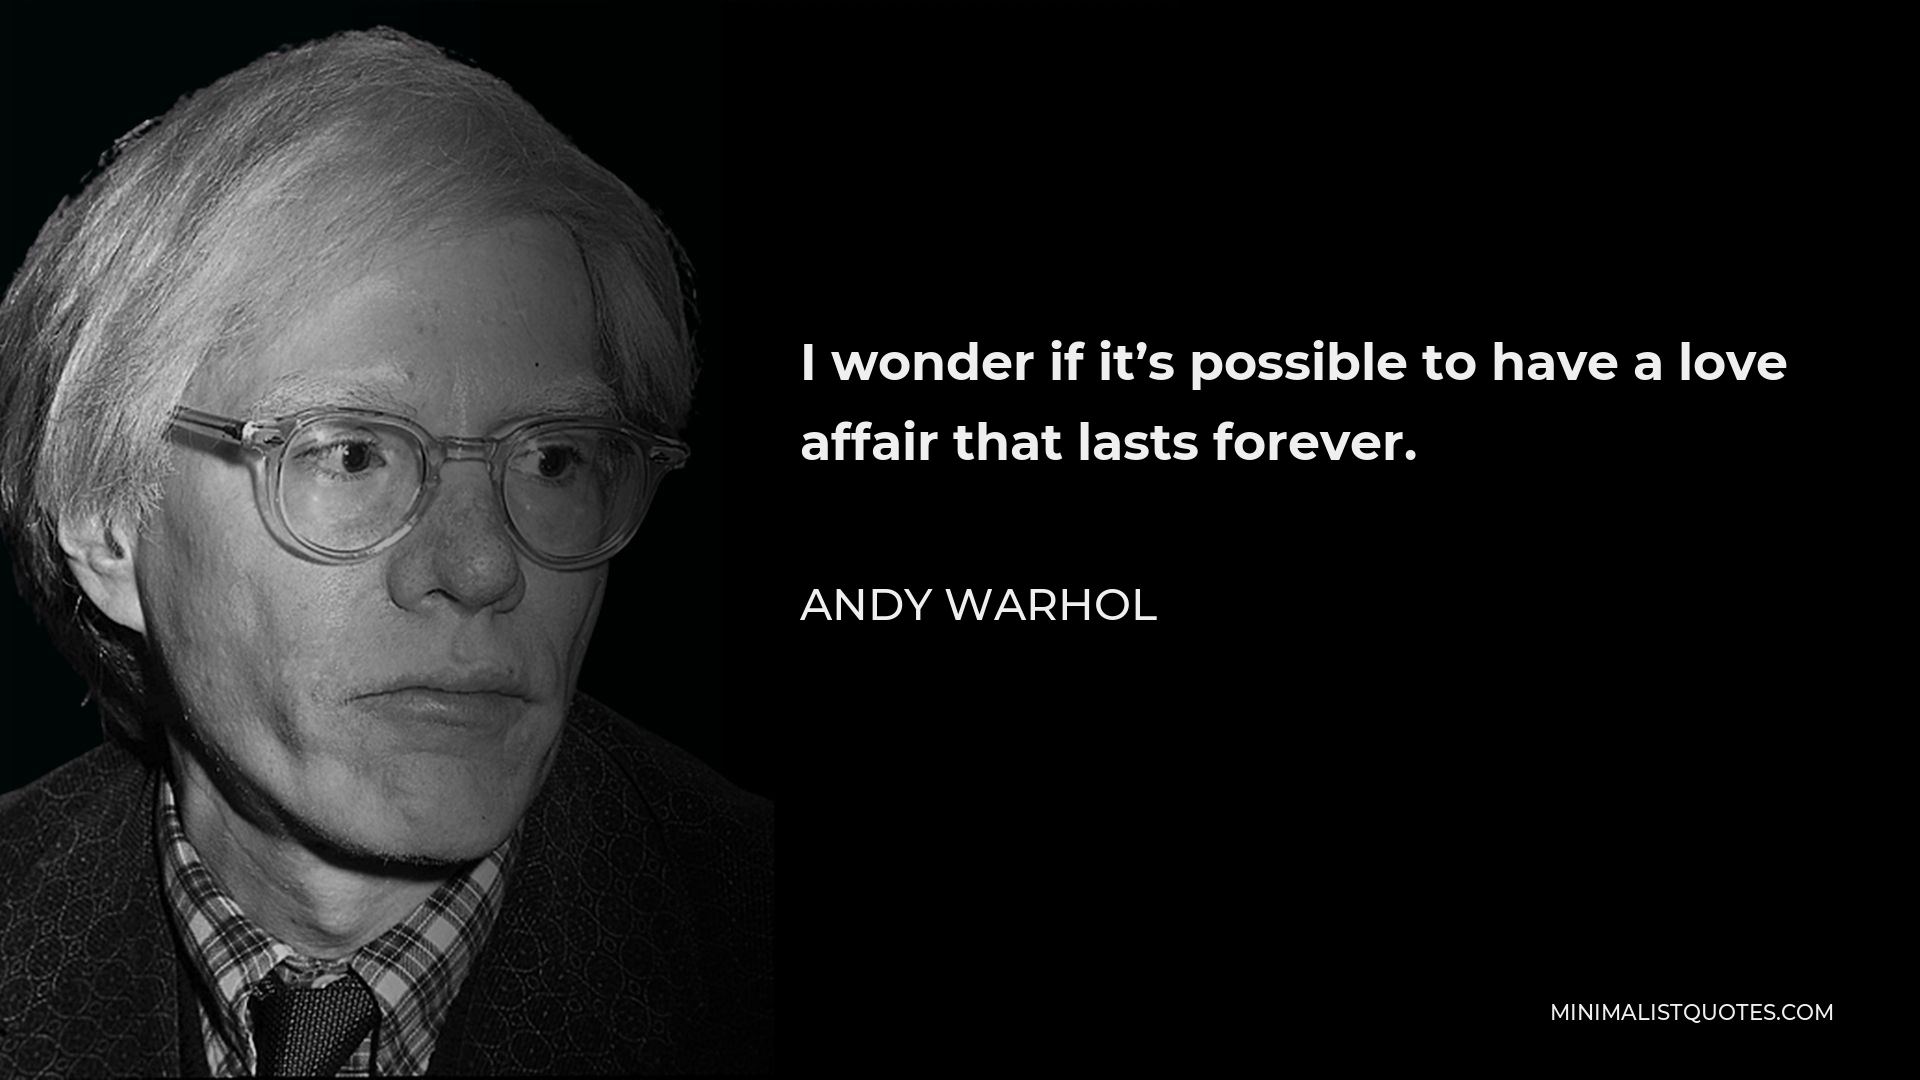 Andy Warhol Quote - I wonder if it’s possible to have a love affair that lasts forever.